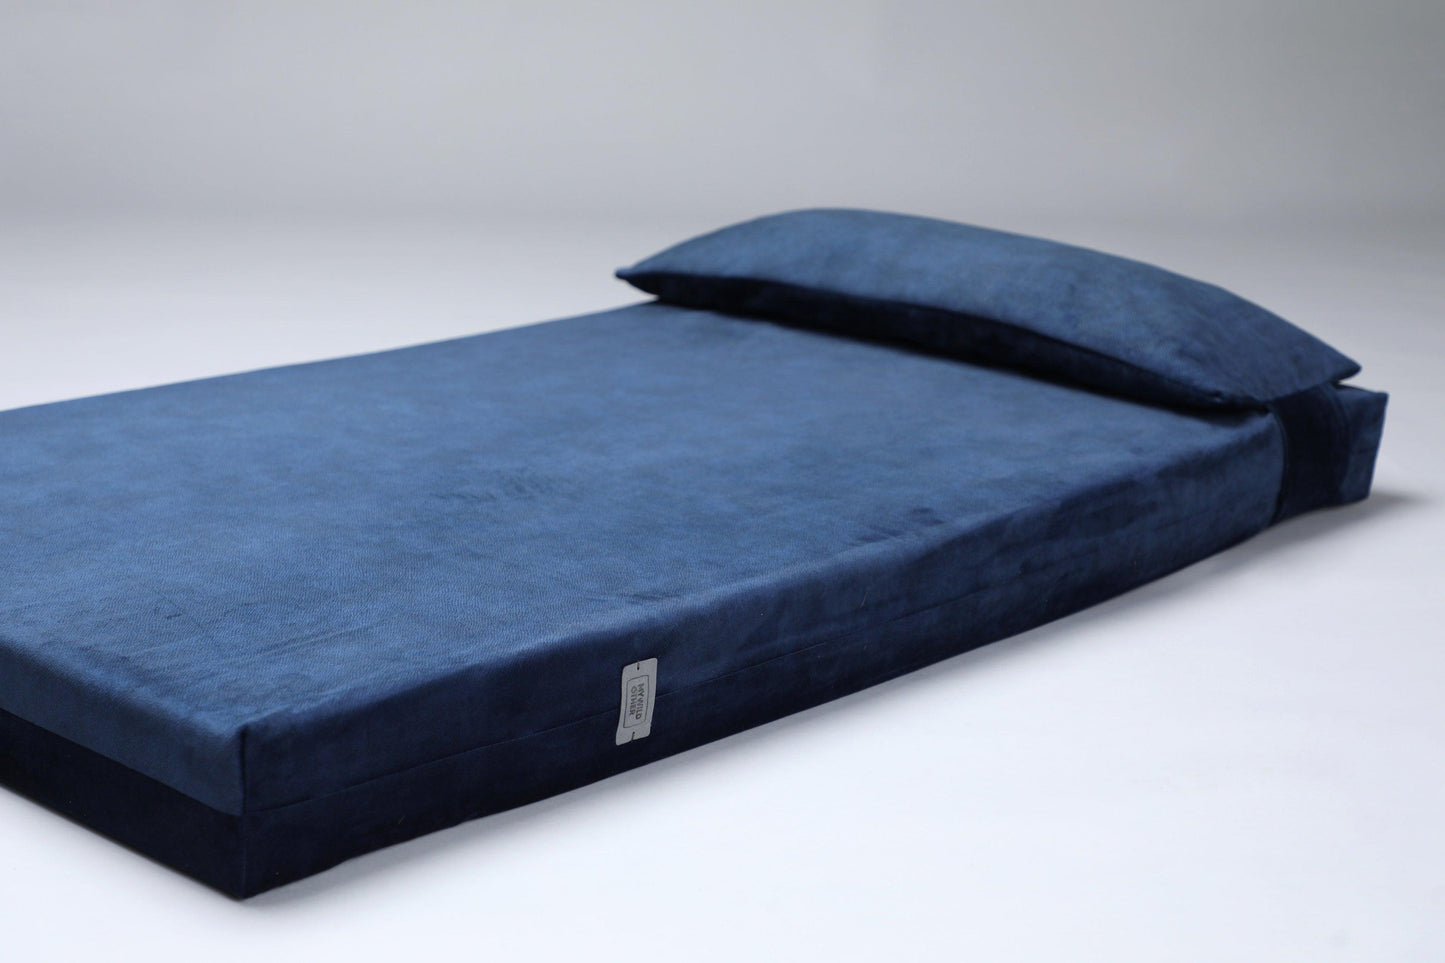 XXL only | 2-sided extra large & supportive dog bed. ROYAL BLUE - premium dog goods handmade in Europe by animalistus